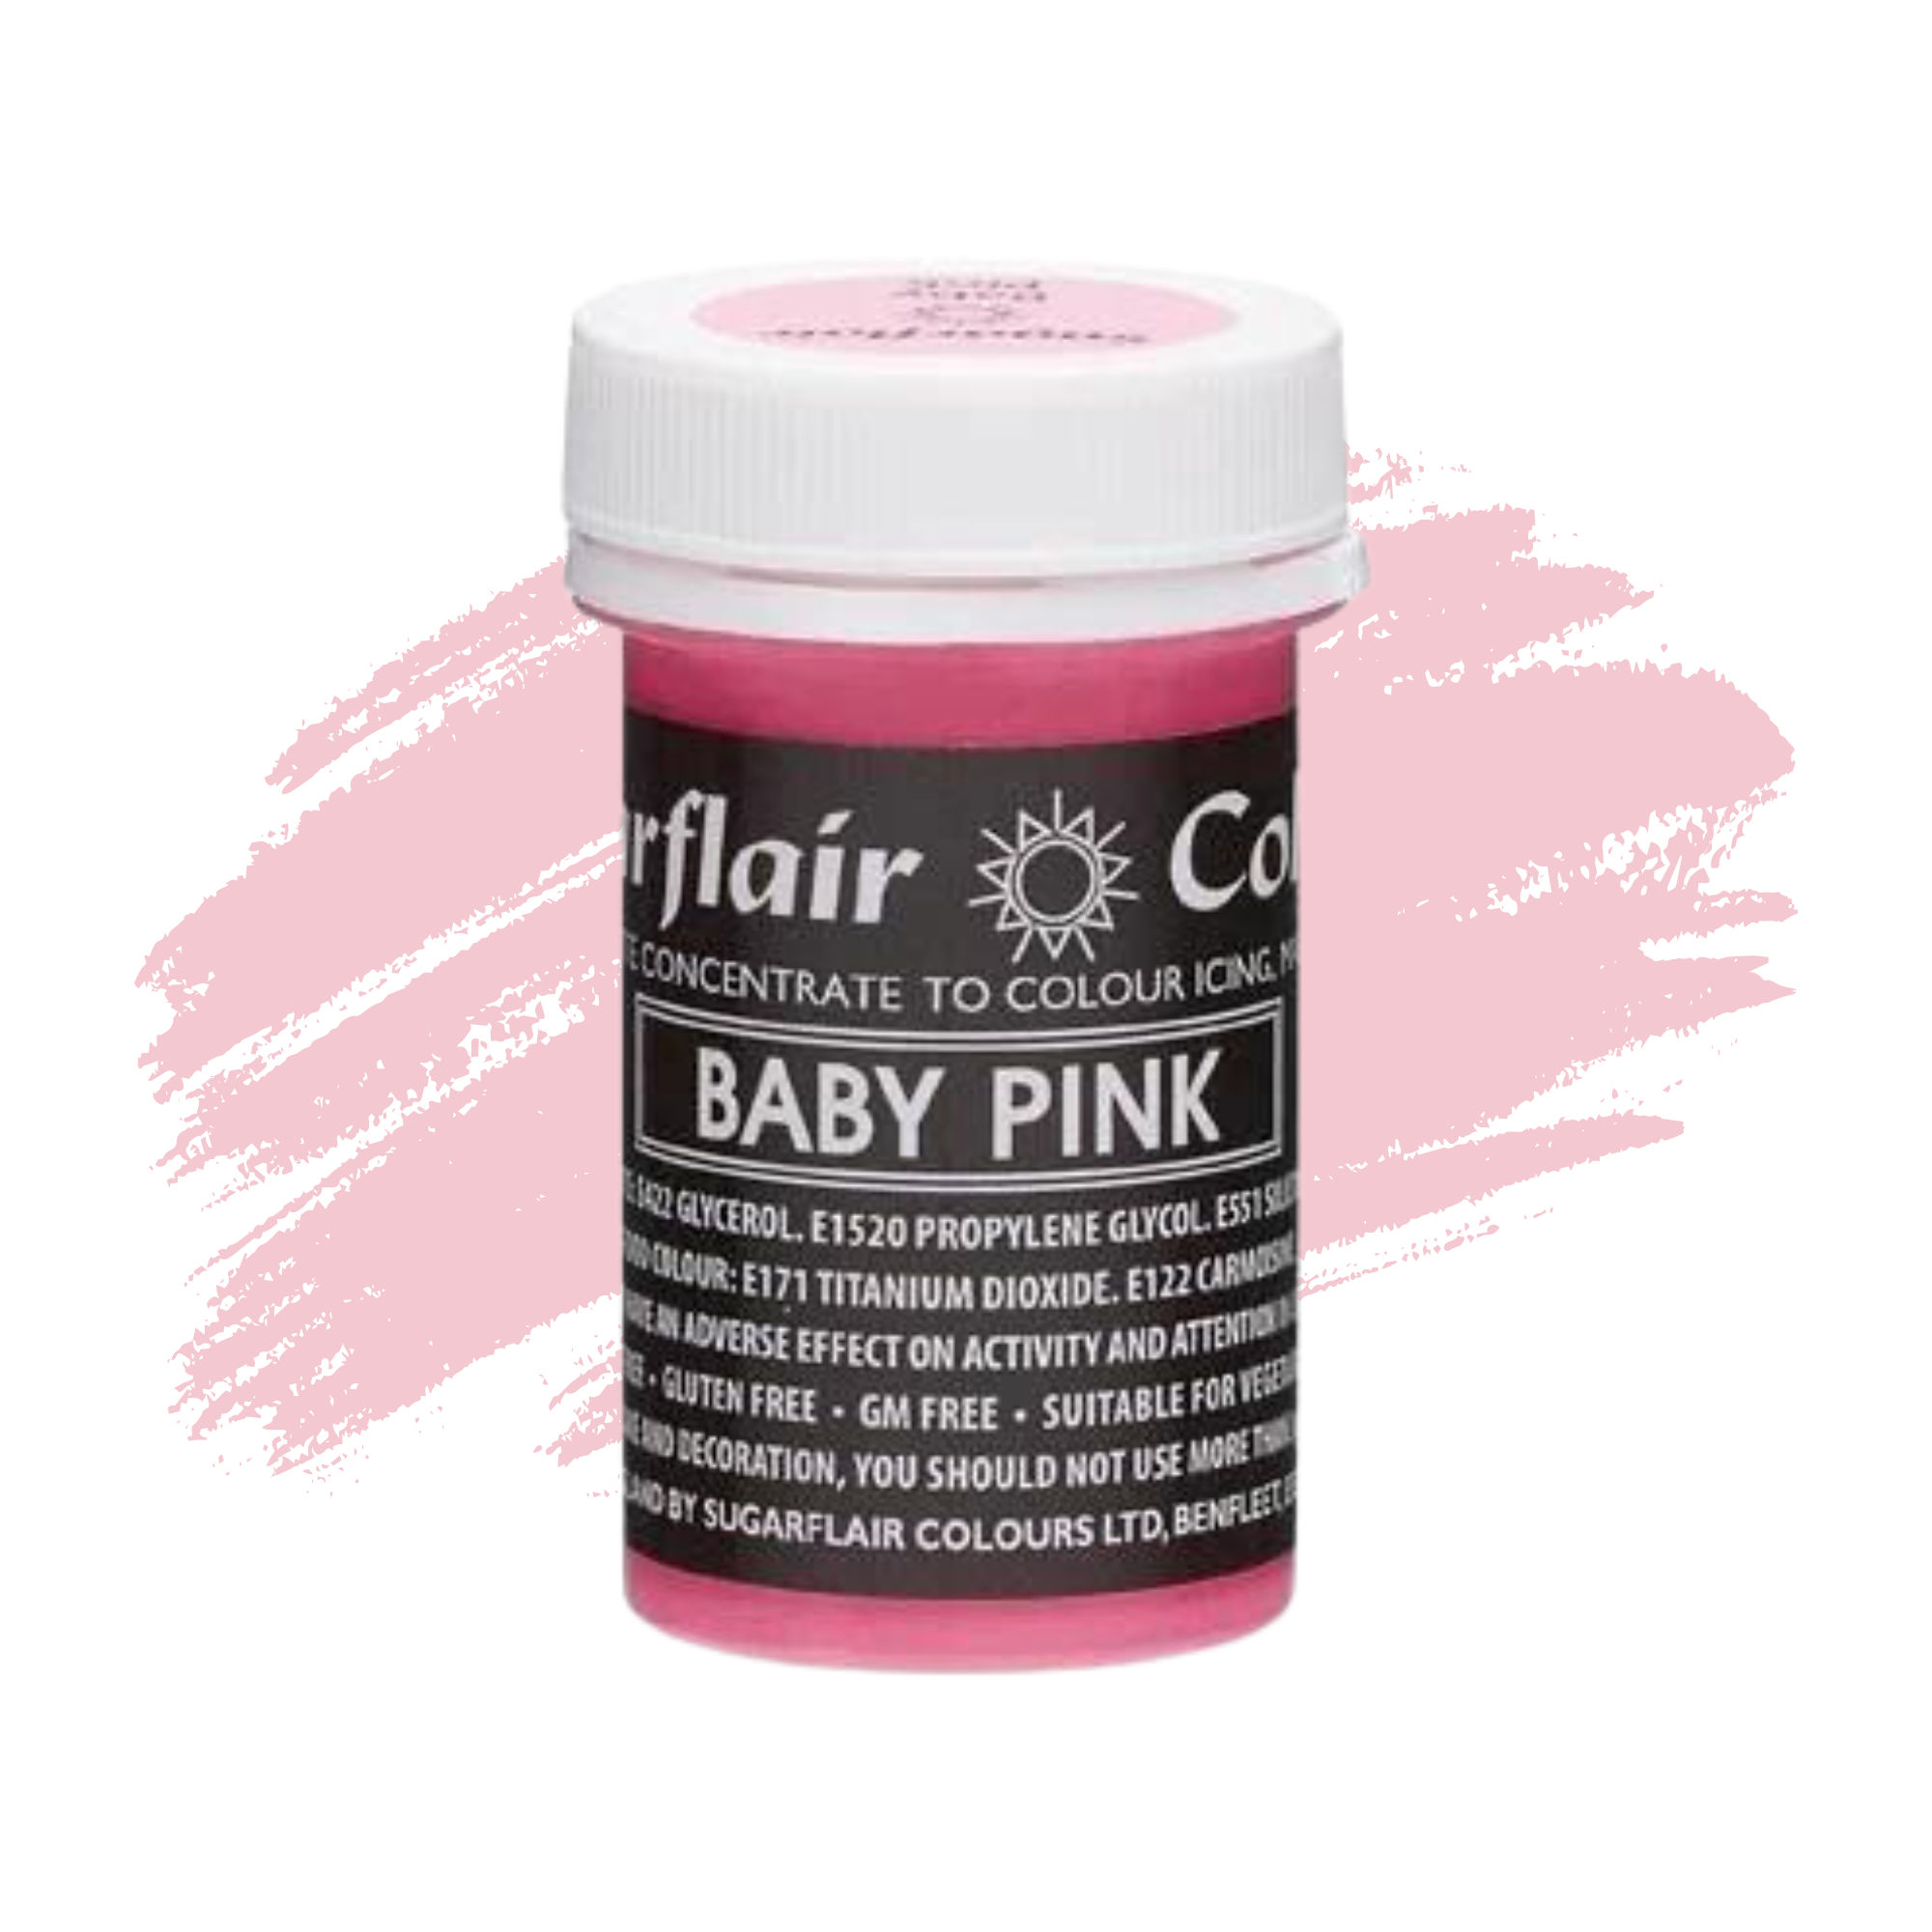 Sugarflair Paste Colours Concentrated Food Colouring - Pastel Baby Pink - 25g